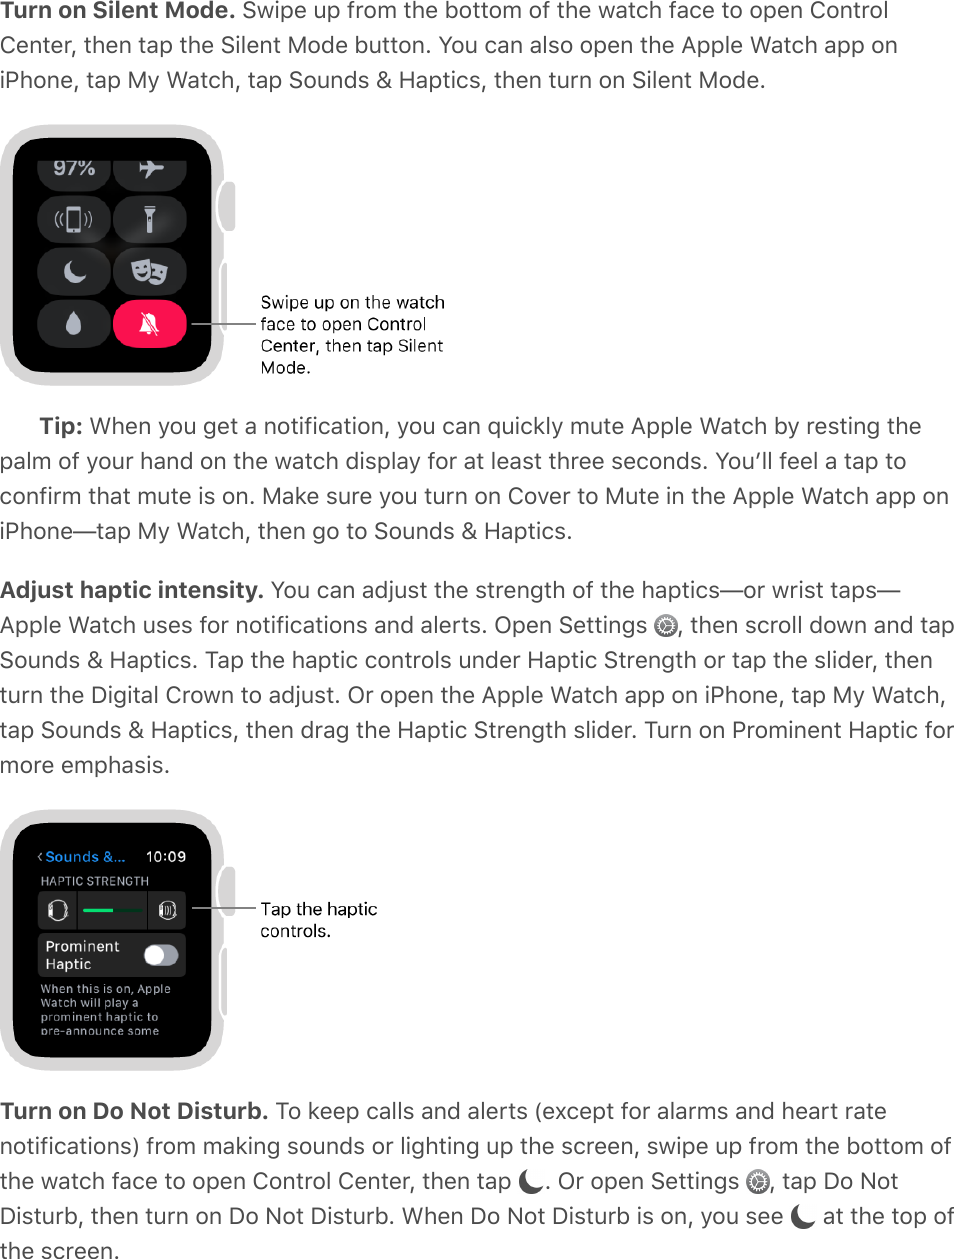 Turn on Silent Mode. Swipe up from the bottom of the watch face to open ControlCenter, then tap the Silent Mode button. You can also open the Apple Watch app oniPhone, tap My Watch, tap Sounds &amp; Haptics, then turn on Silent Mode.Tip: When you get a notification, you can quickly mute Apple Watch by resting thepalm of your hand on the watch display for at least three seconds. Youʼll feel a tap toconfirm that mute is on. Make sure you turn on Cover to Mute in the Apple Watch app oniPhone—tap My Watch, then go to Sounds &amp; Haptics.Adjust haptic intensity. You can adjust the strength of the haptics—or wrist taps—Apple Watch uses for notifications and alerts. Open Settings  , then scroll down and tapSounds &amp; Haptics. Tap the haptic controls under Haptic Strength or tap the slider, thenturn the Digital Crown to adjust. Or open the Apple Watch app on iPhone, tap My Watch,tap Sounds &amp; Haptics, then drag the Haptic Strength slider. Turn on Prominent Haptic formore emphasis.Turn on Do Not Disturb. To keep calls and alerts (except for alarms and heart ratenotifications) from making sounds or lighting up the screen, swipe up from the bottom ofthe watch face to open Control Center, then tap  . Or open Settings  , tap Do NotDisturb, then turn on Do Not Disturb. When Do Not Disturb is on, you see   at the top ofthe screen.